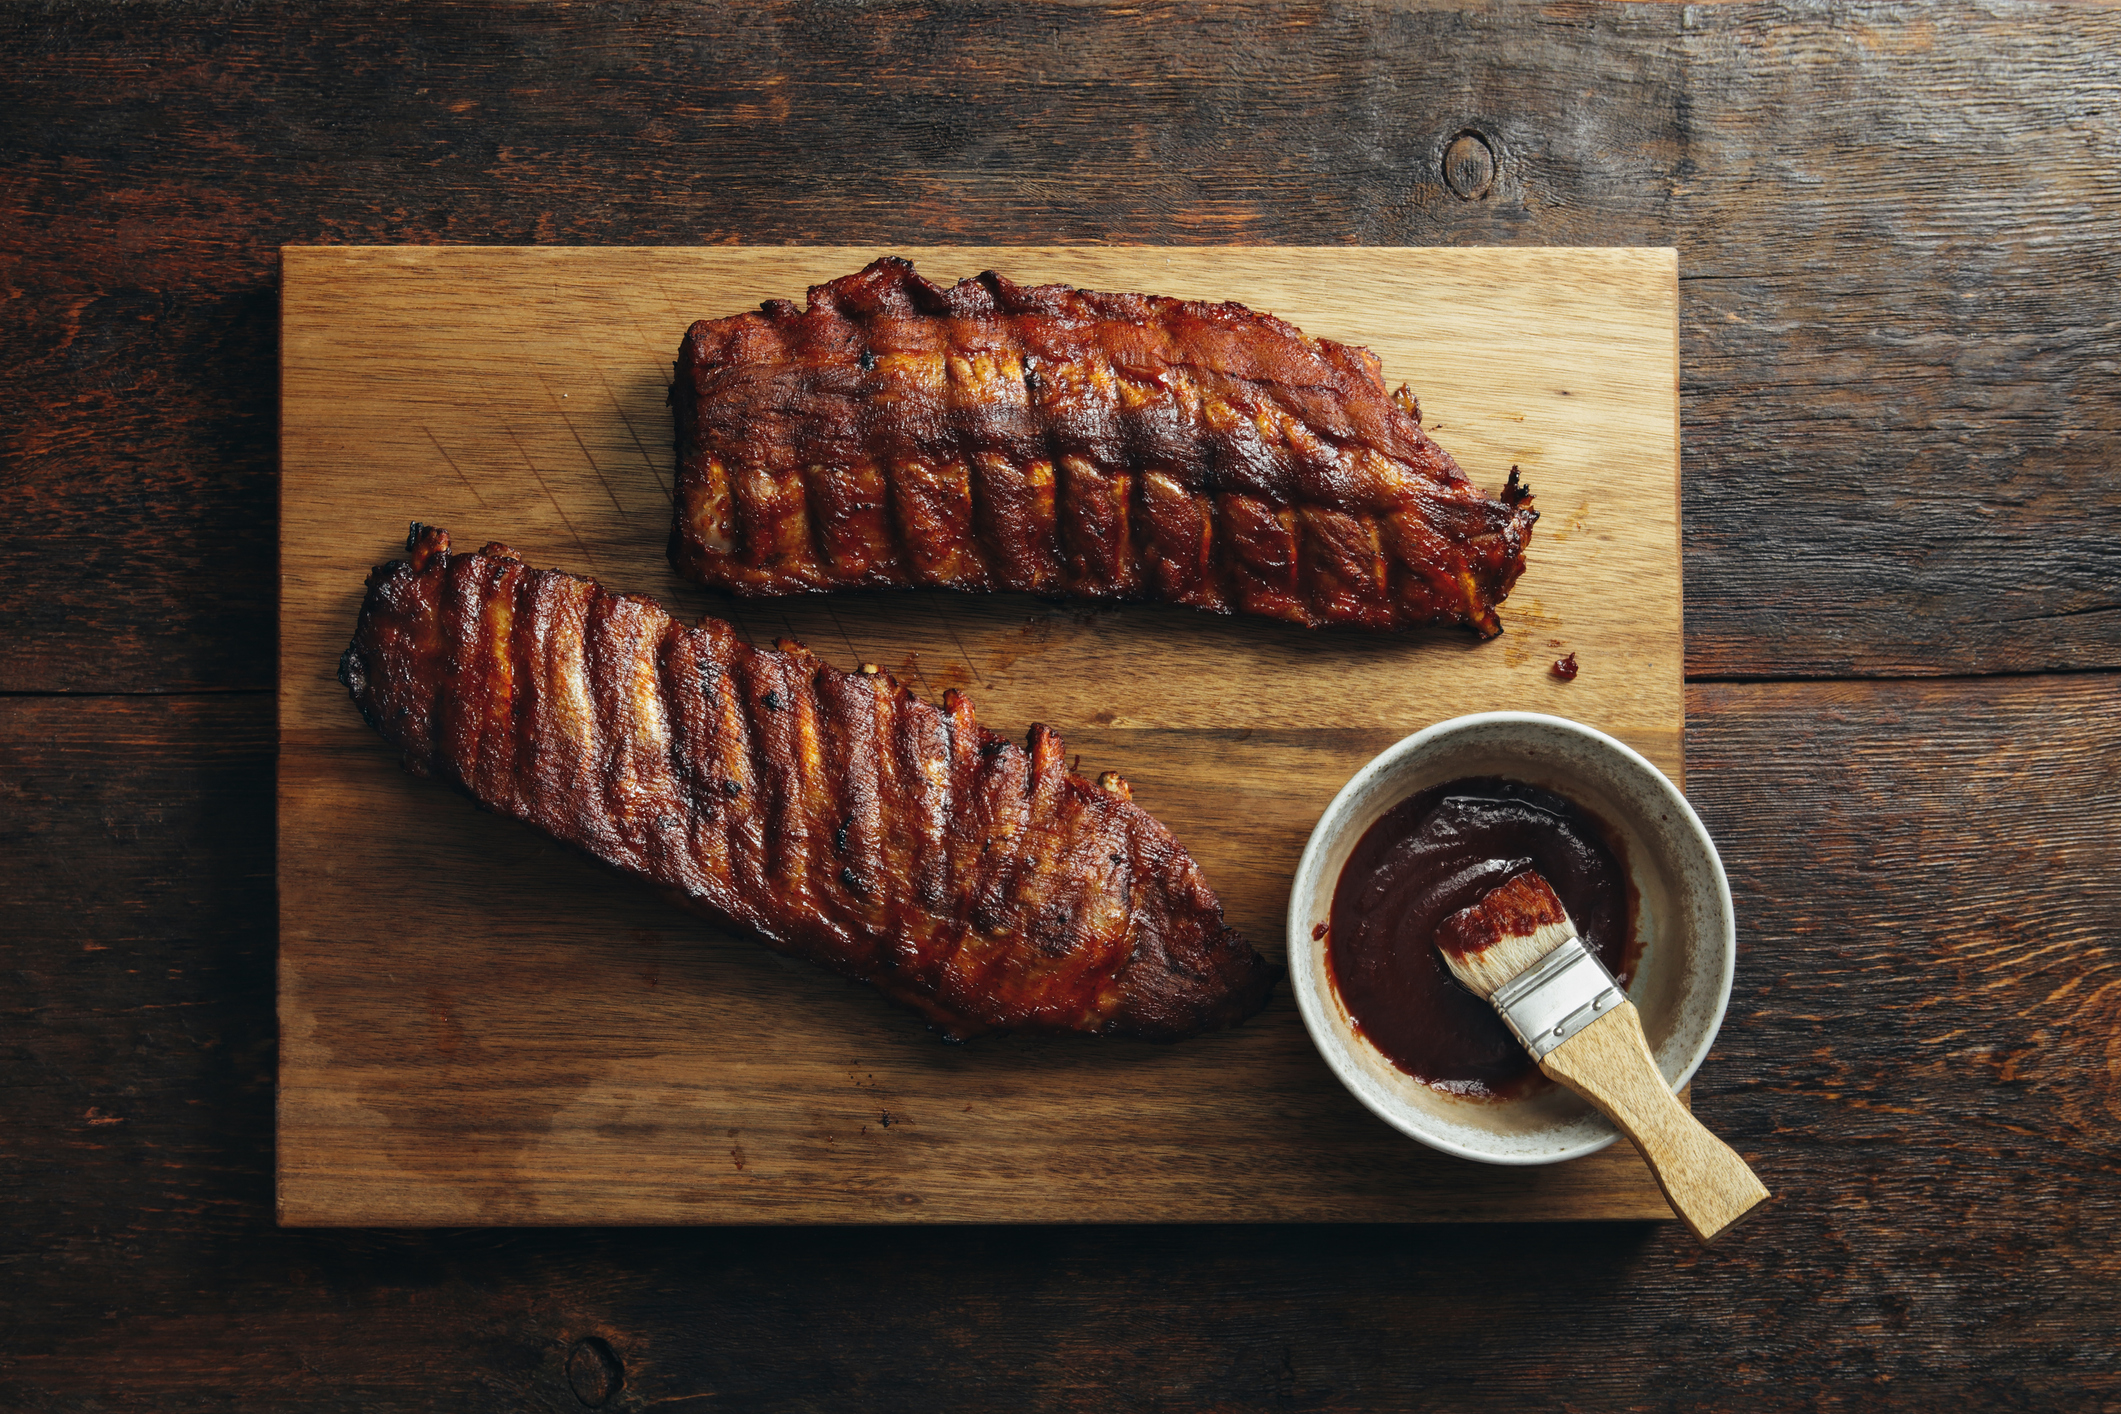 Grilled pork ribs with barbecue sauce on wooden background